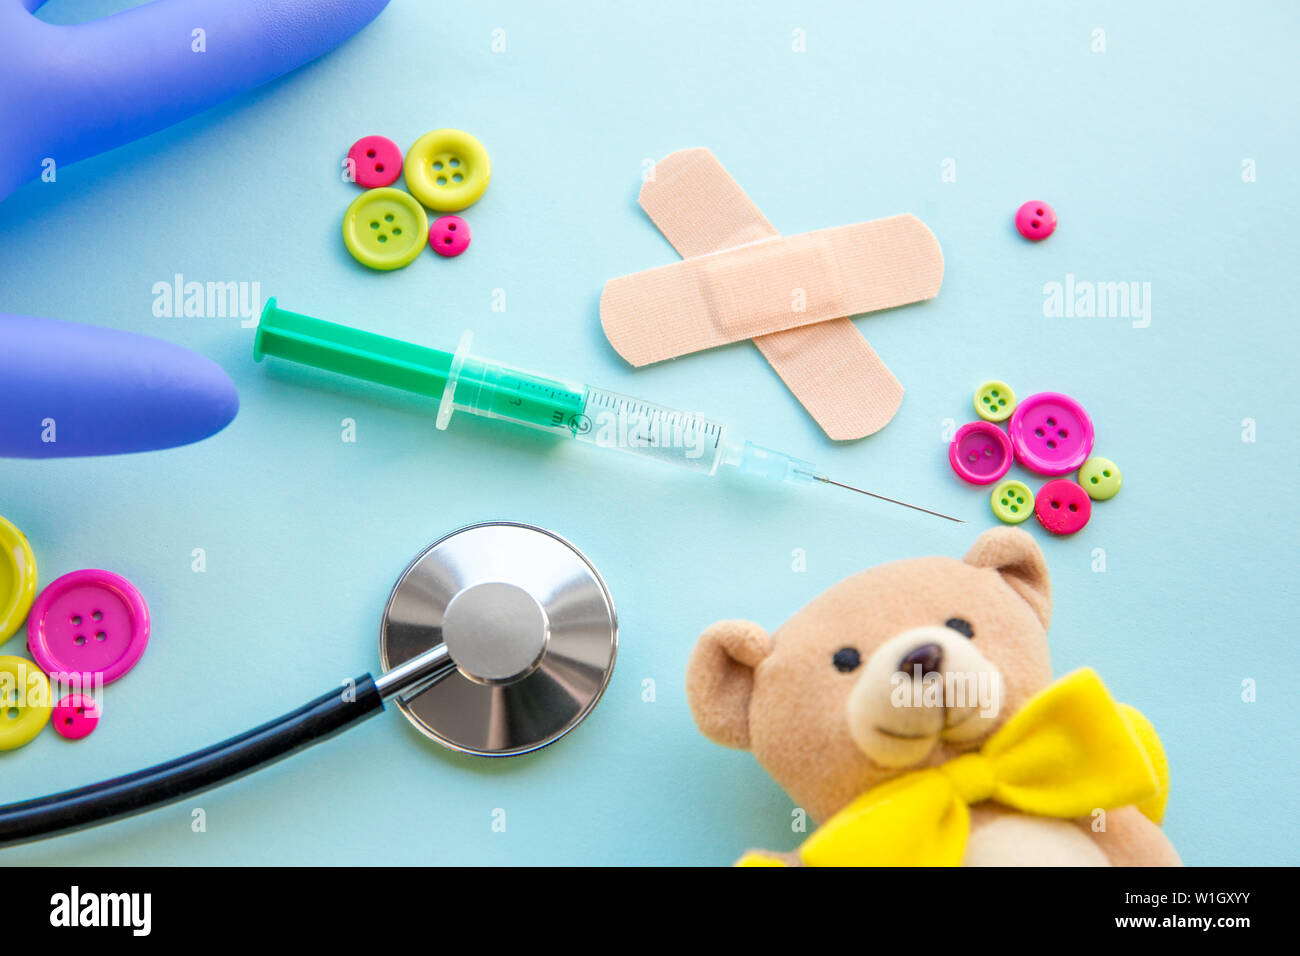 Children`s doctor appointment date number concept. Calendar with numbers, doctor, kids toys, pink and green buttons. Flat lay view. Stock Photo